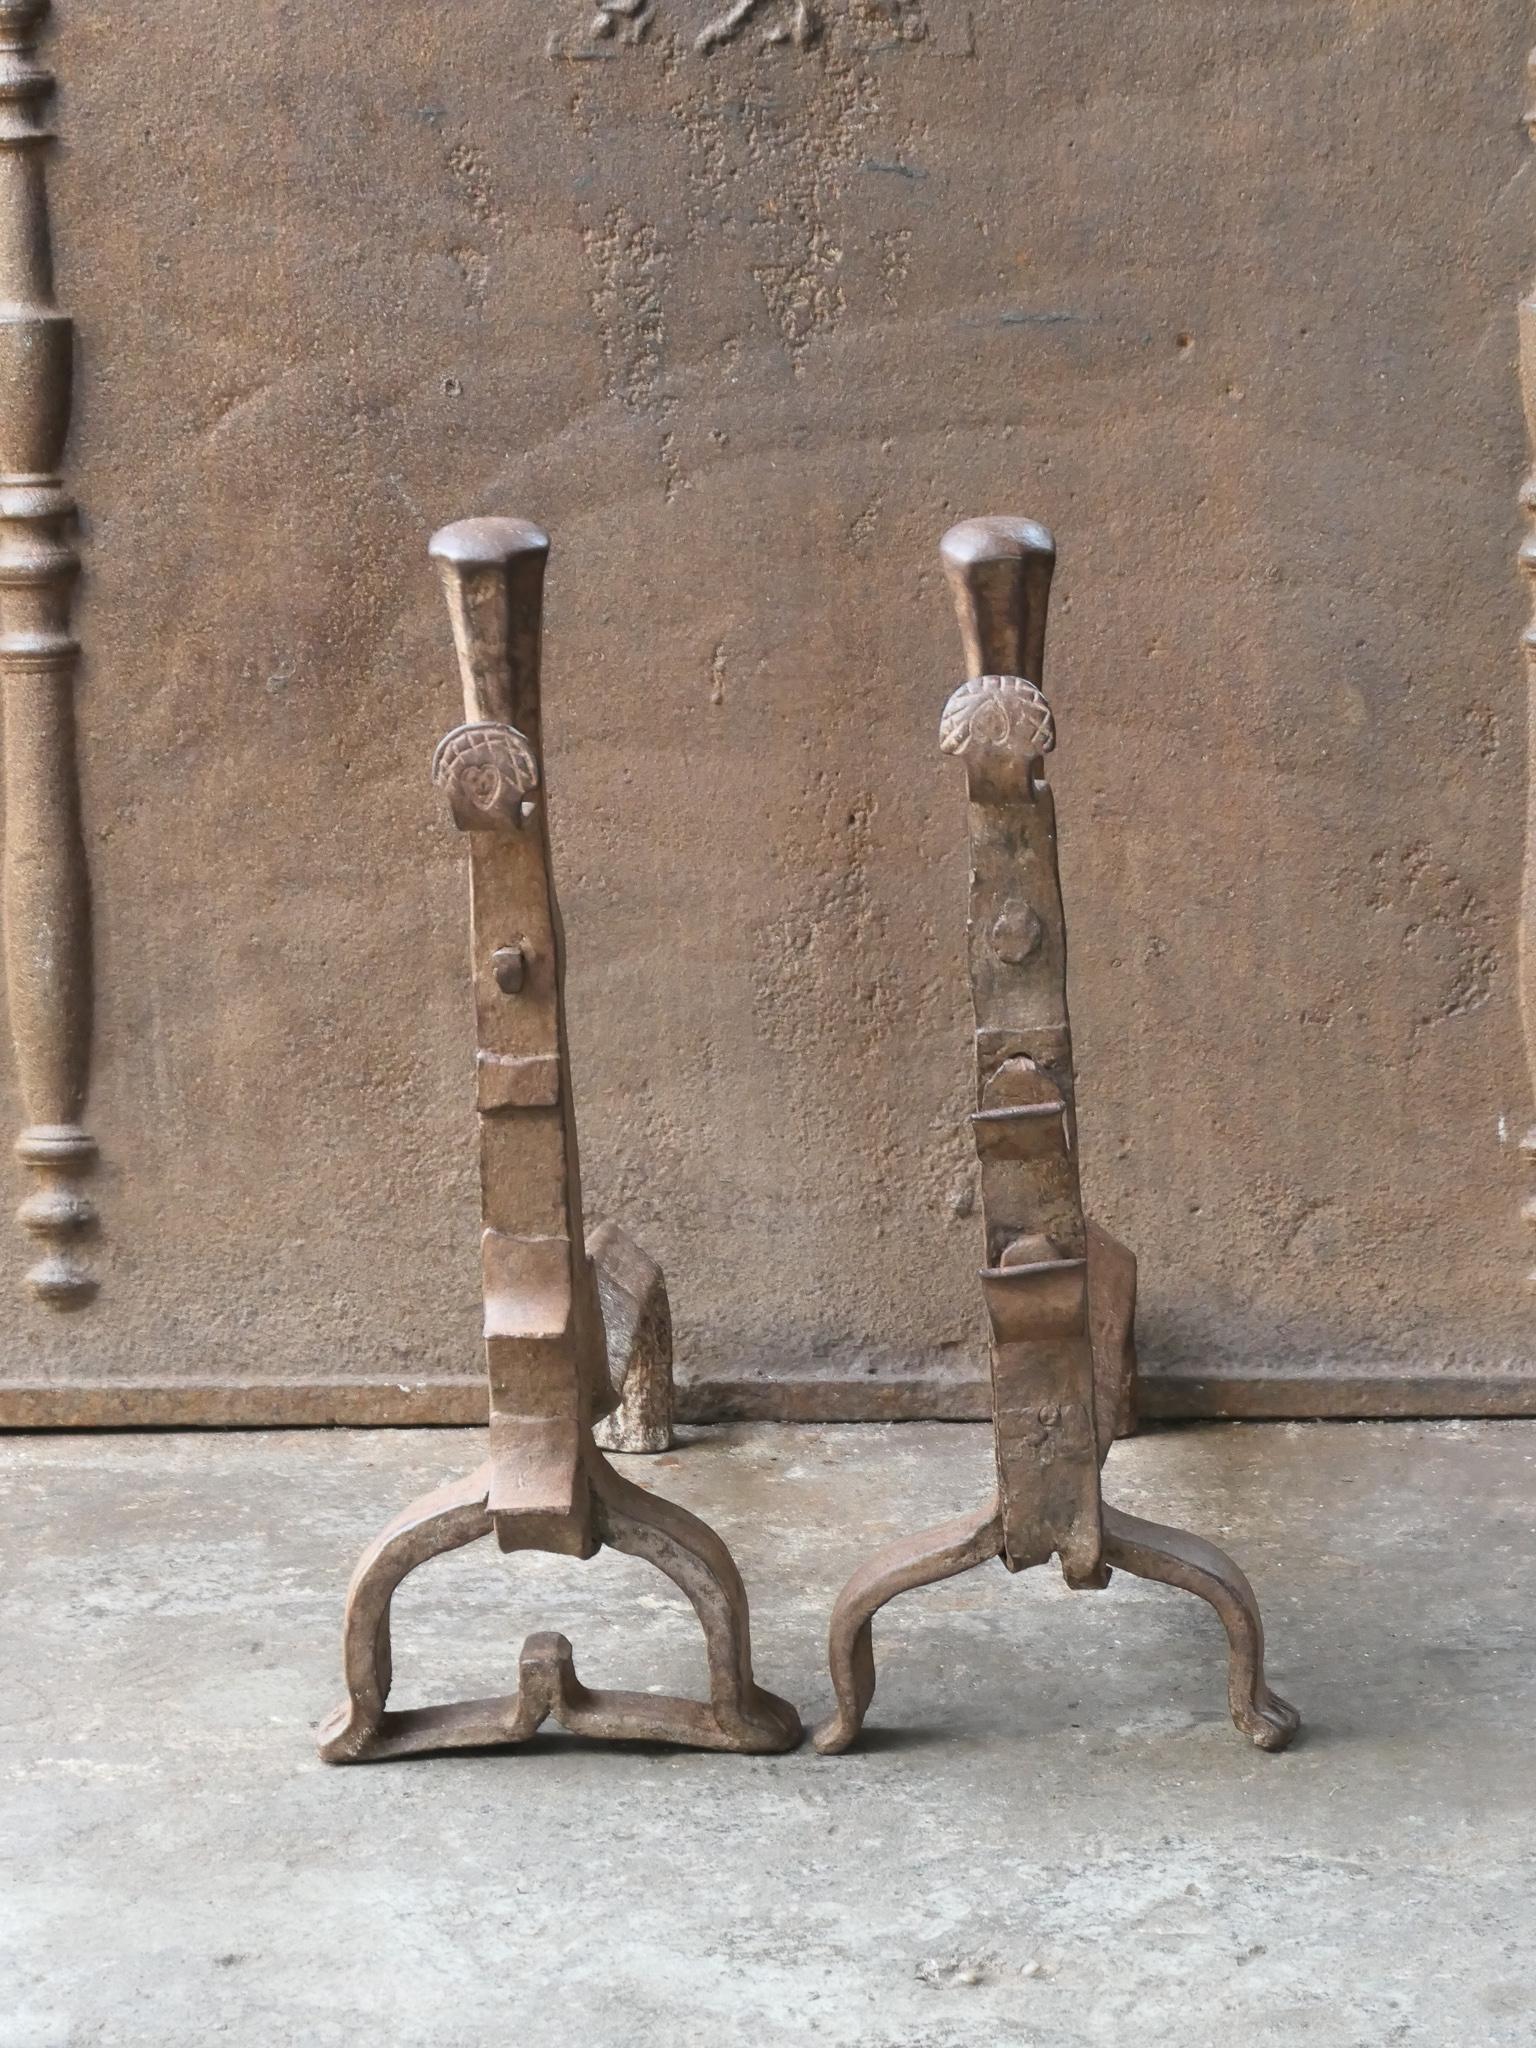 17th century French andirons made of wrought iron. The style of the andirons is gothic. Some ornaments are missing, but they are in a good functional condition.